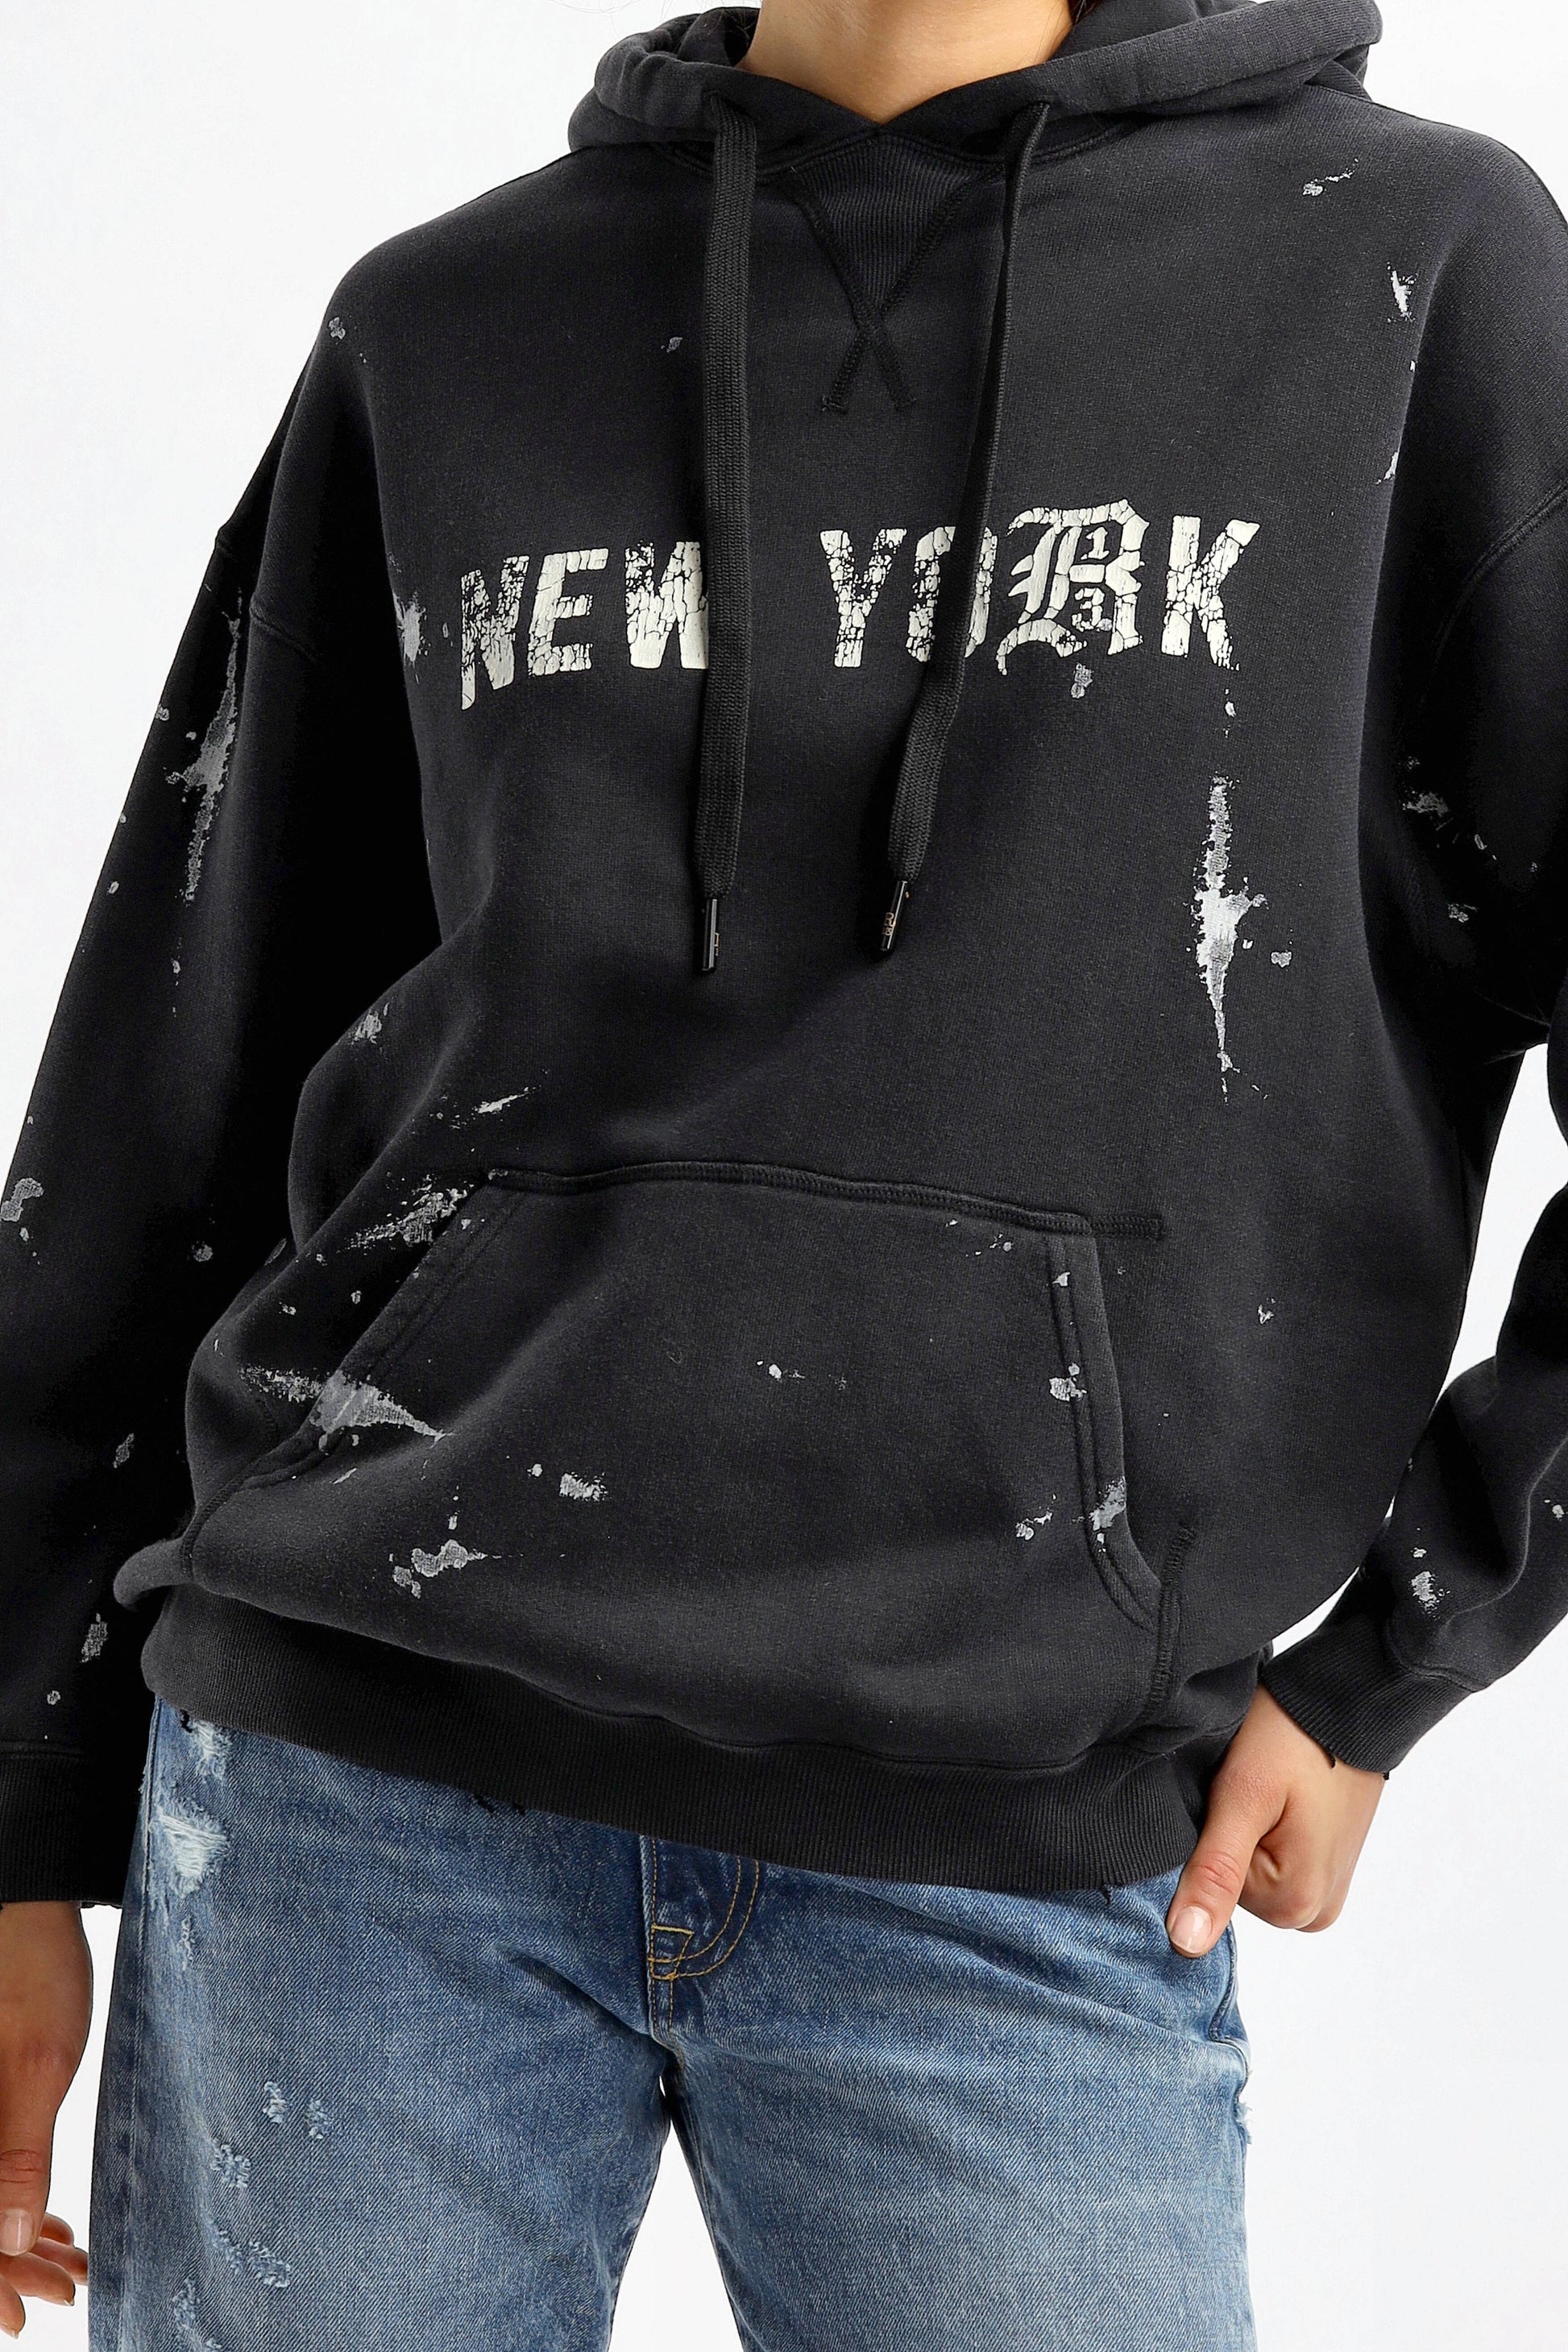 R13 New York Hoodie - One-color